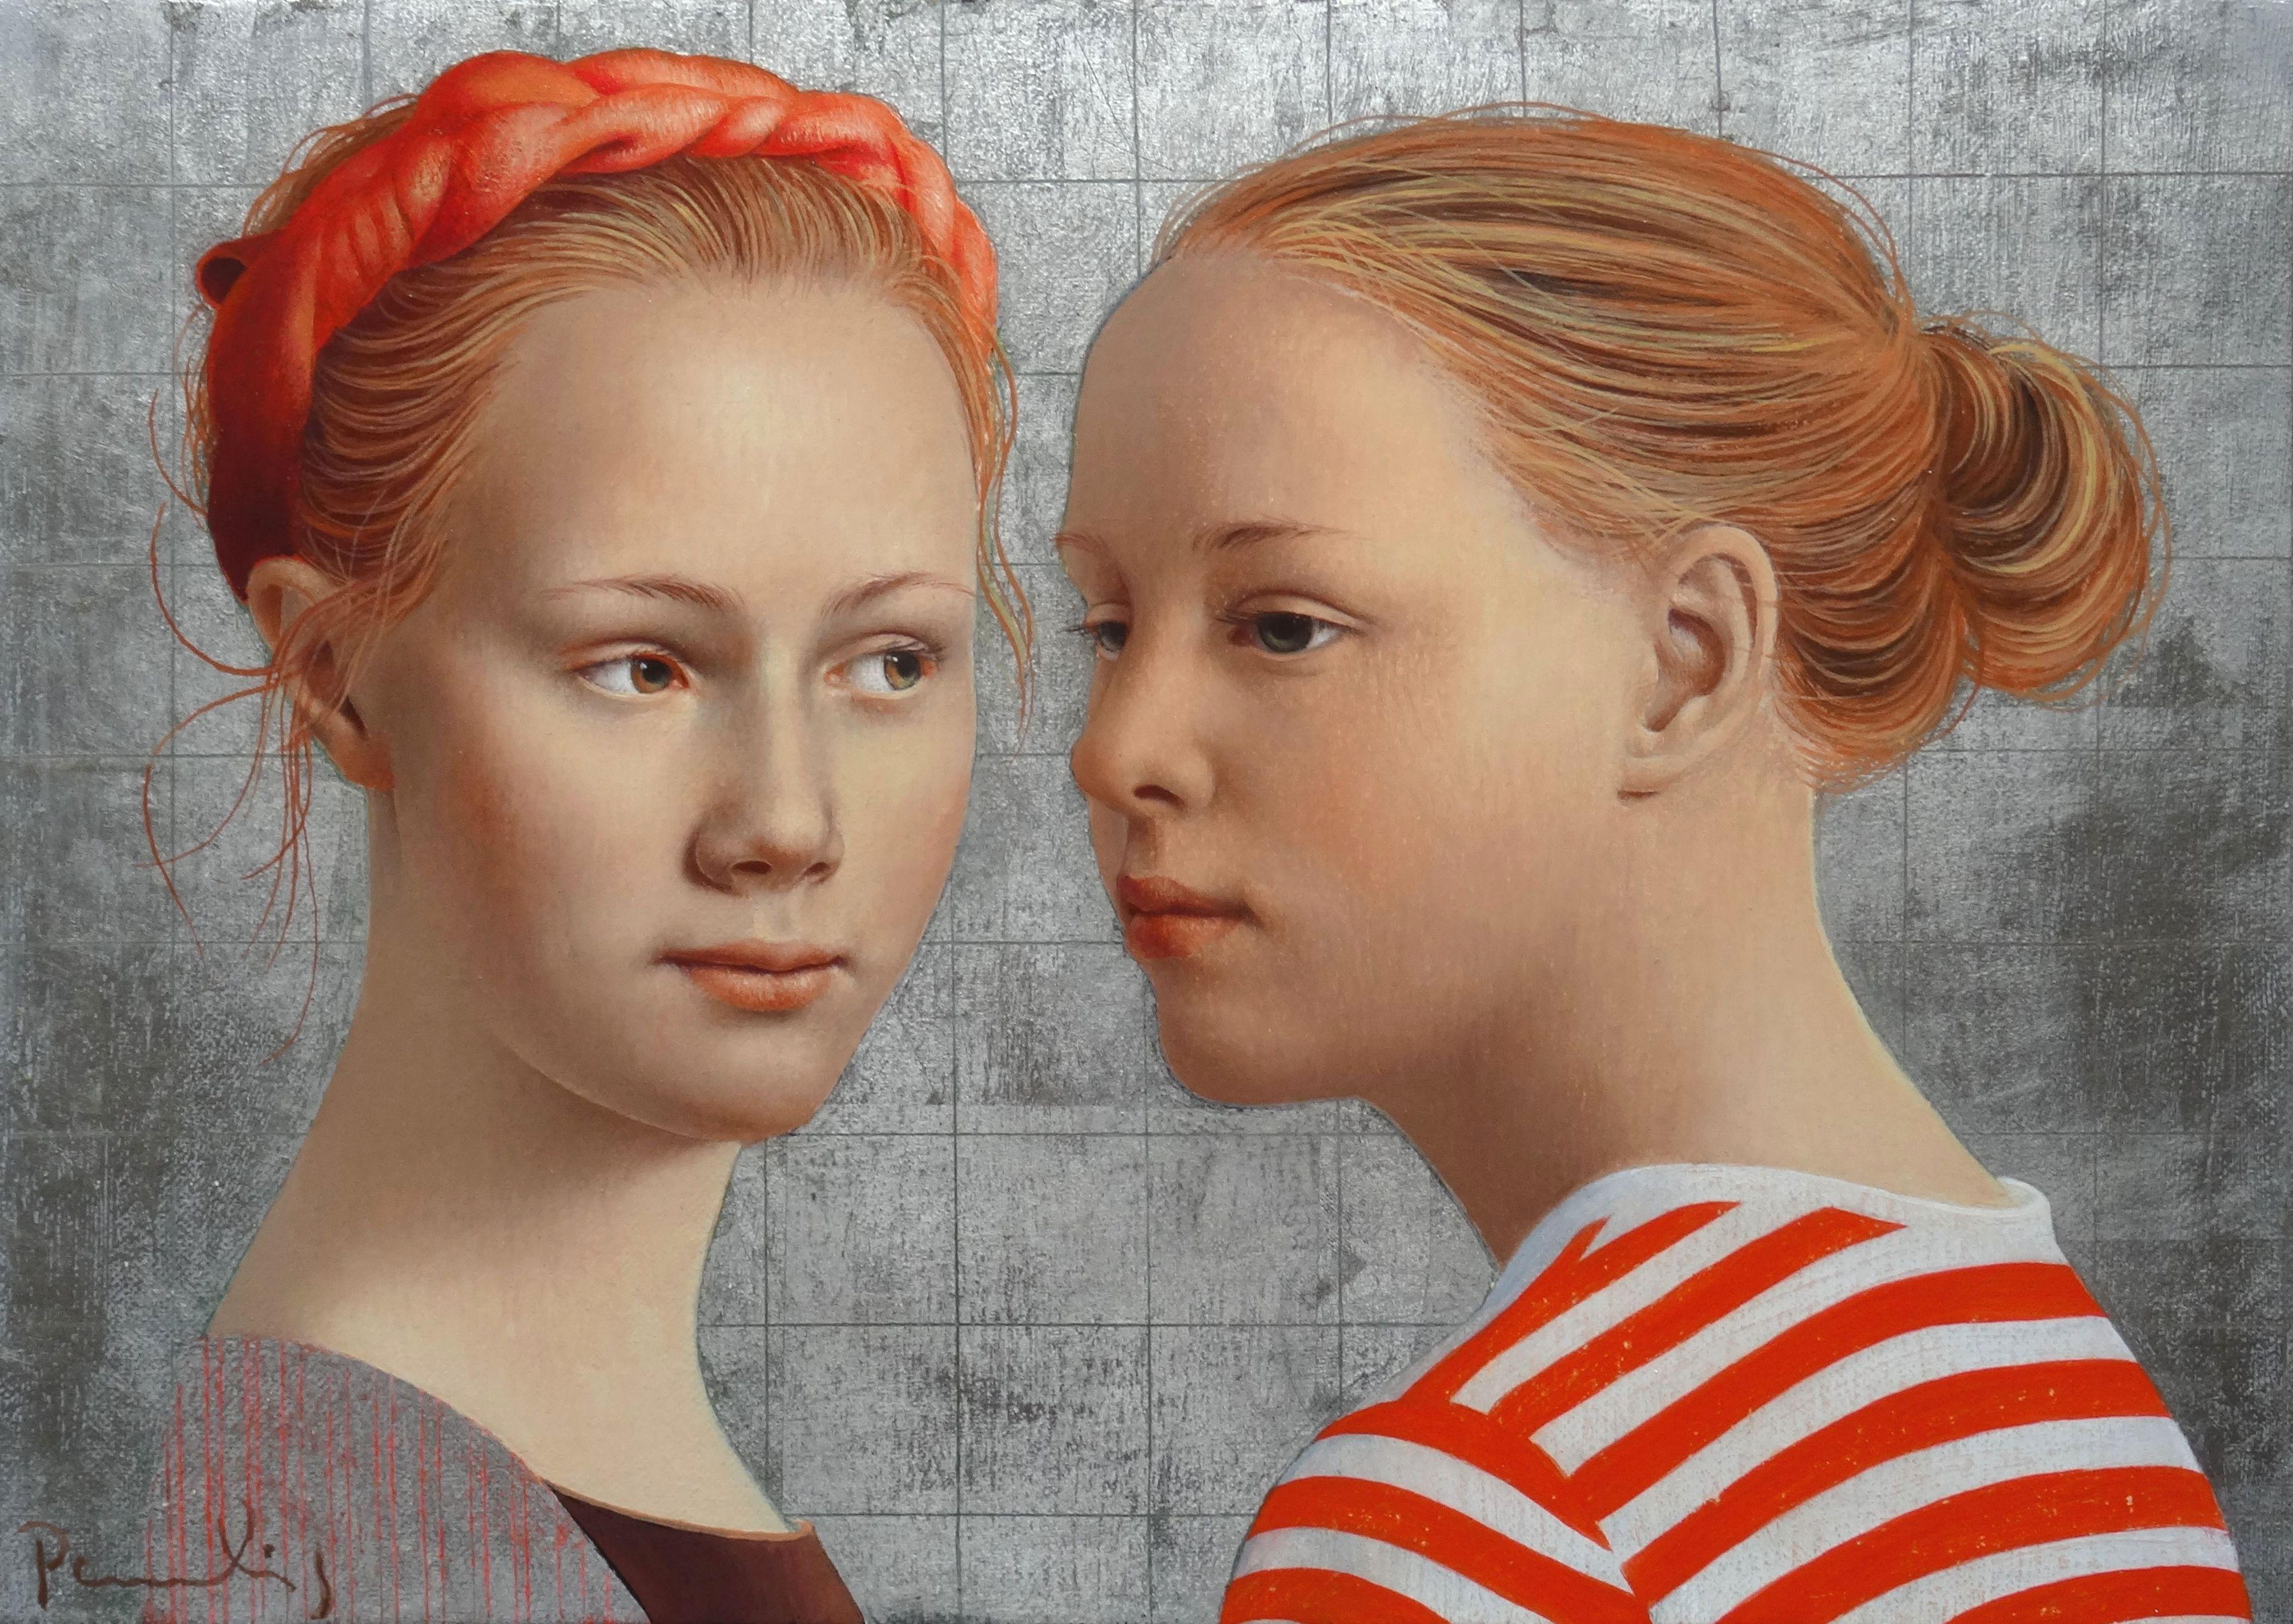 Sisters. 2021. Oil on canvas, 25x35 cm